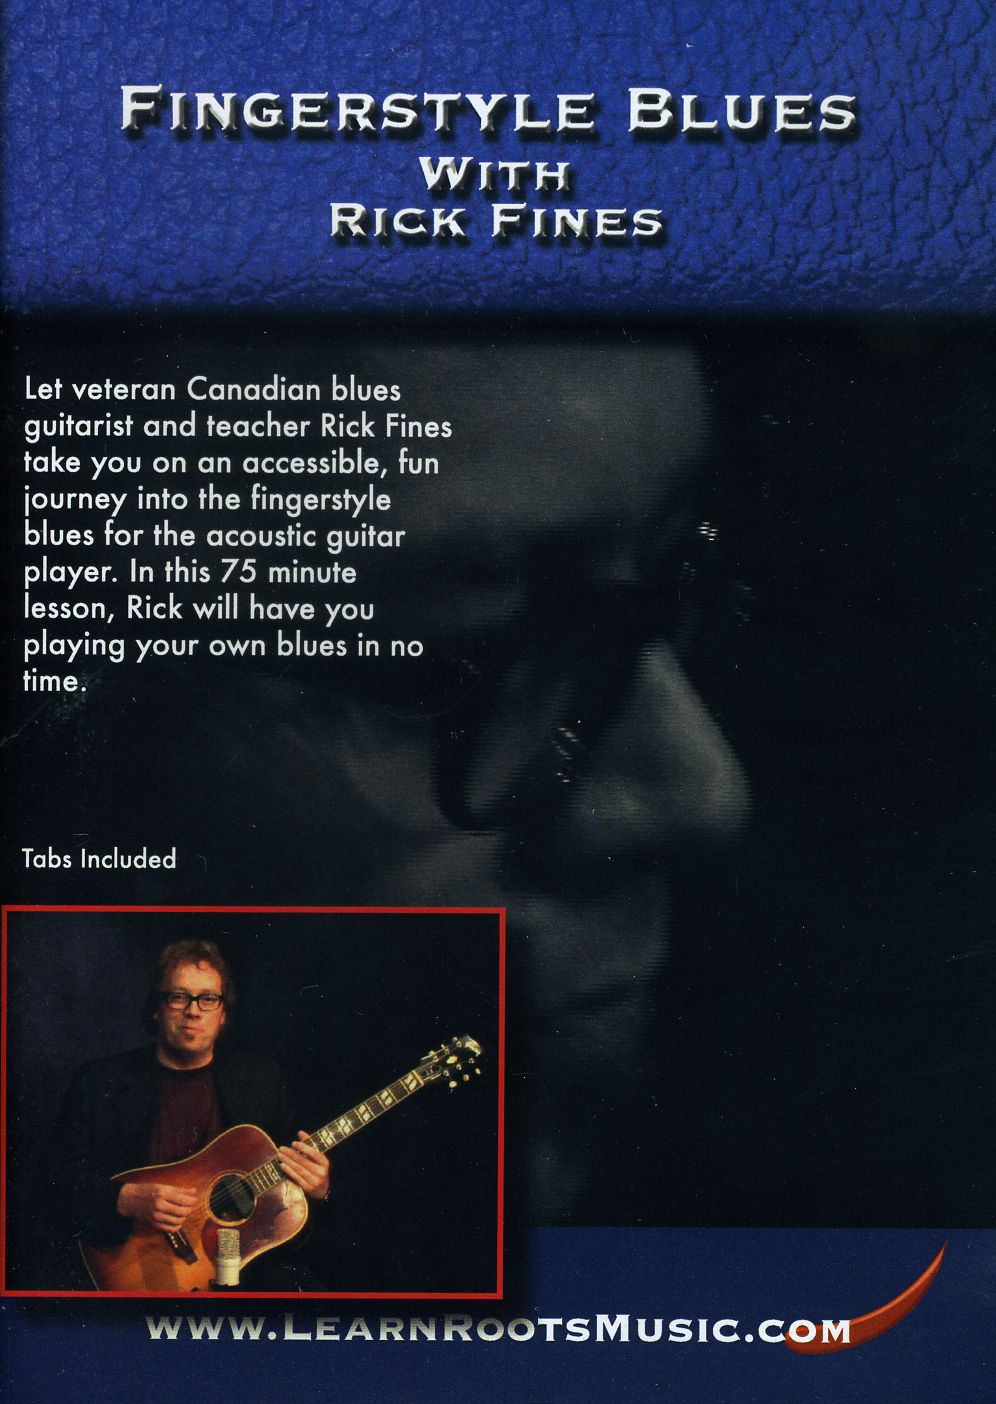 FINGERSTYLE BLUES WITH RICK FINES